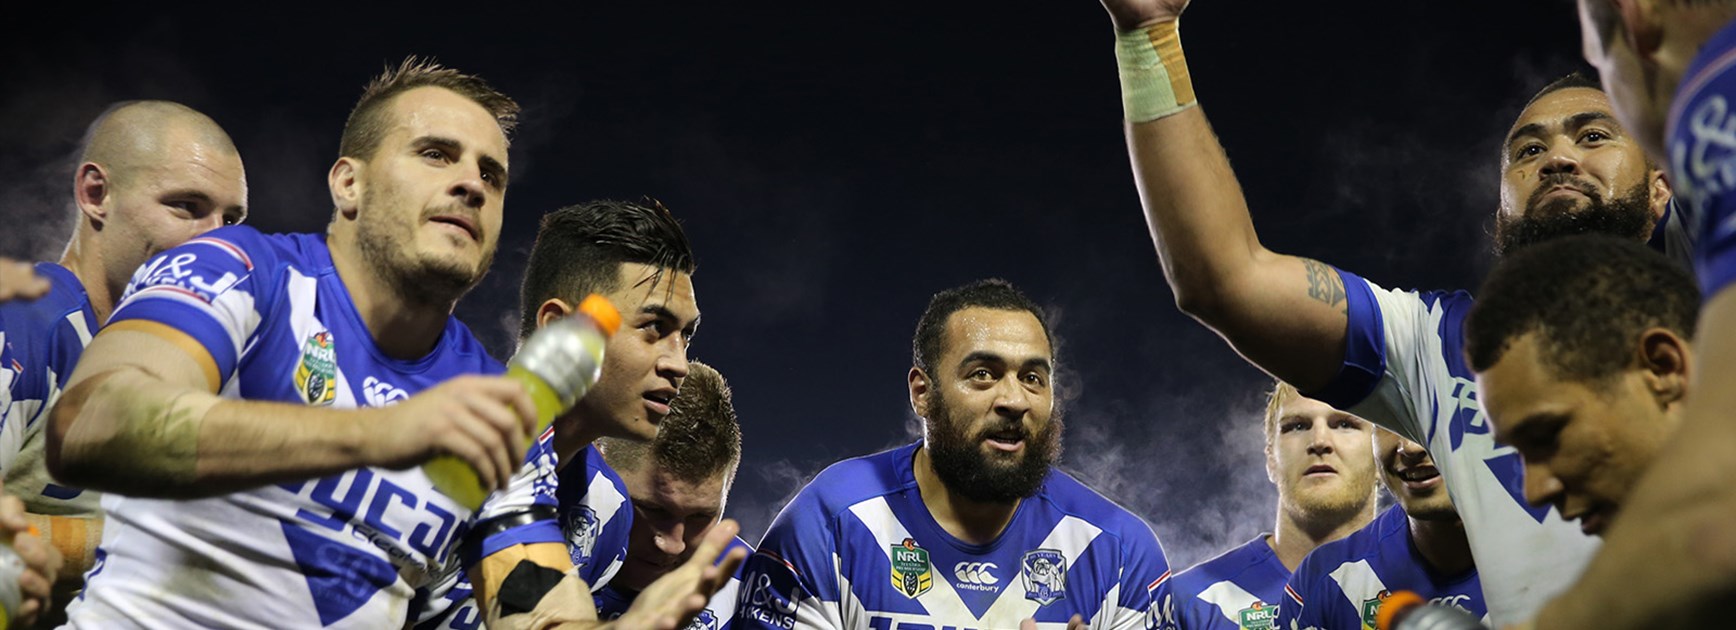 Bulldogs' players celebrate their win at Belmore Sports Ground.